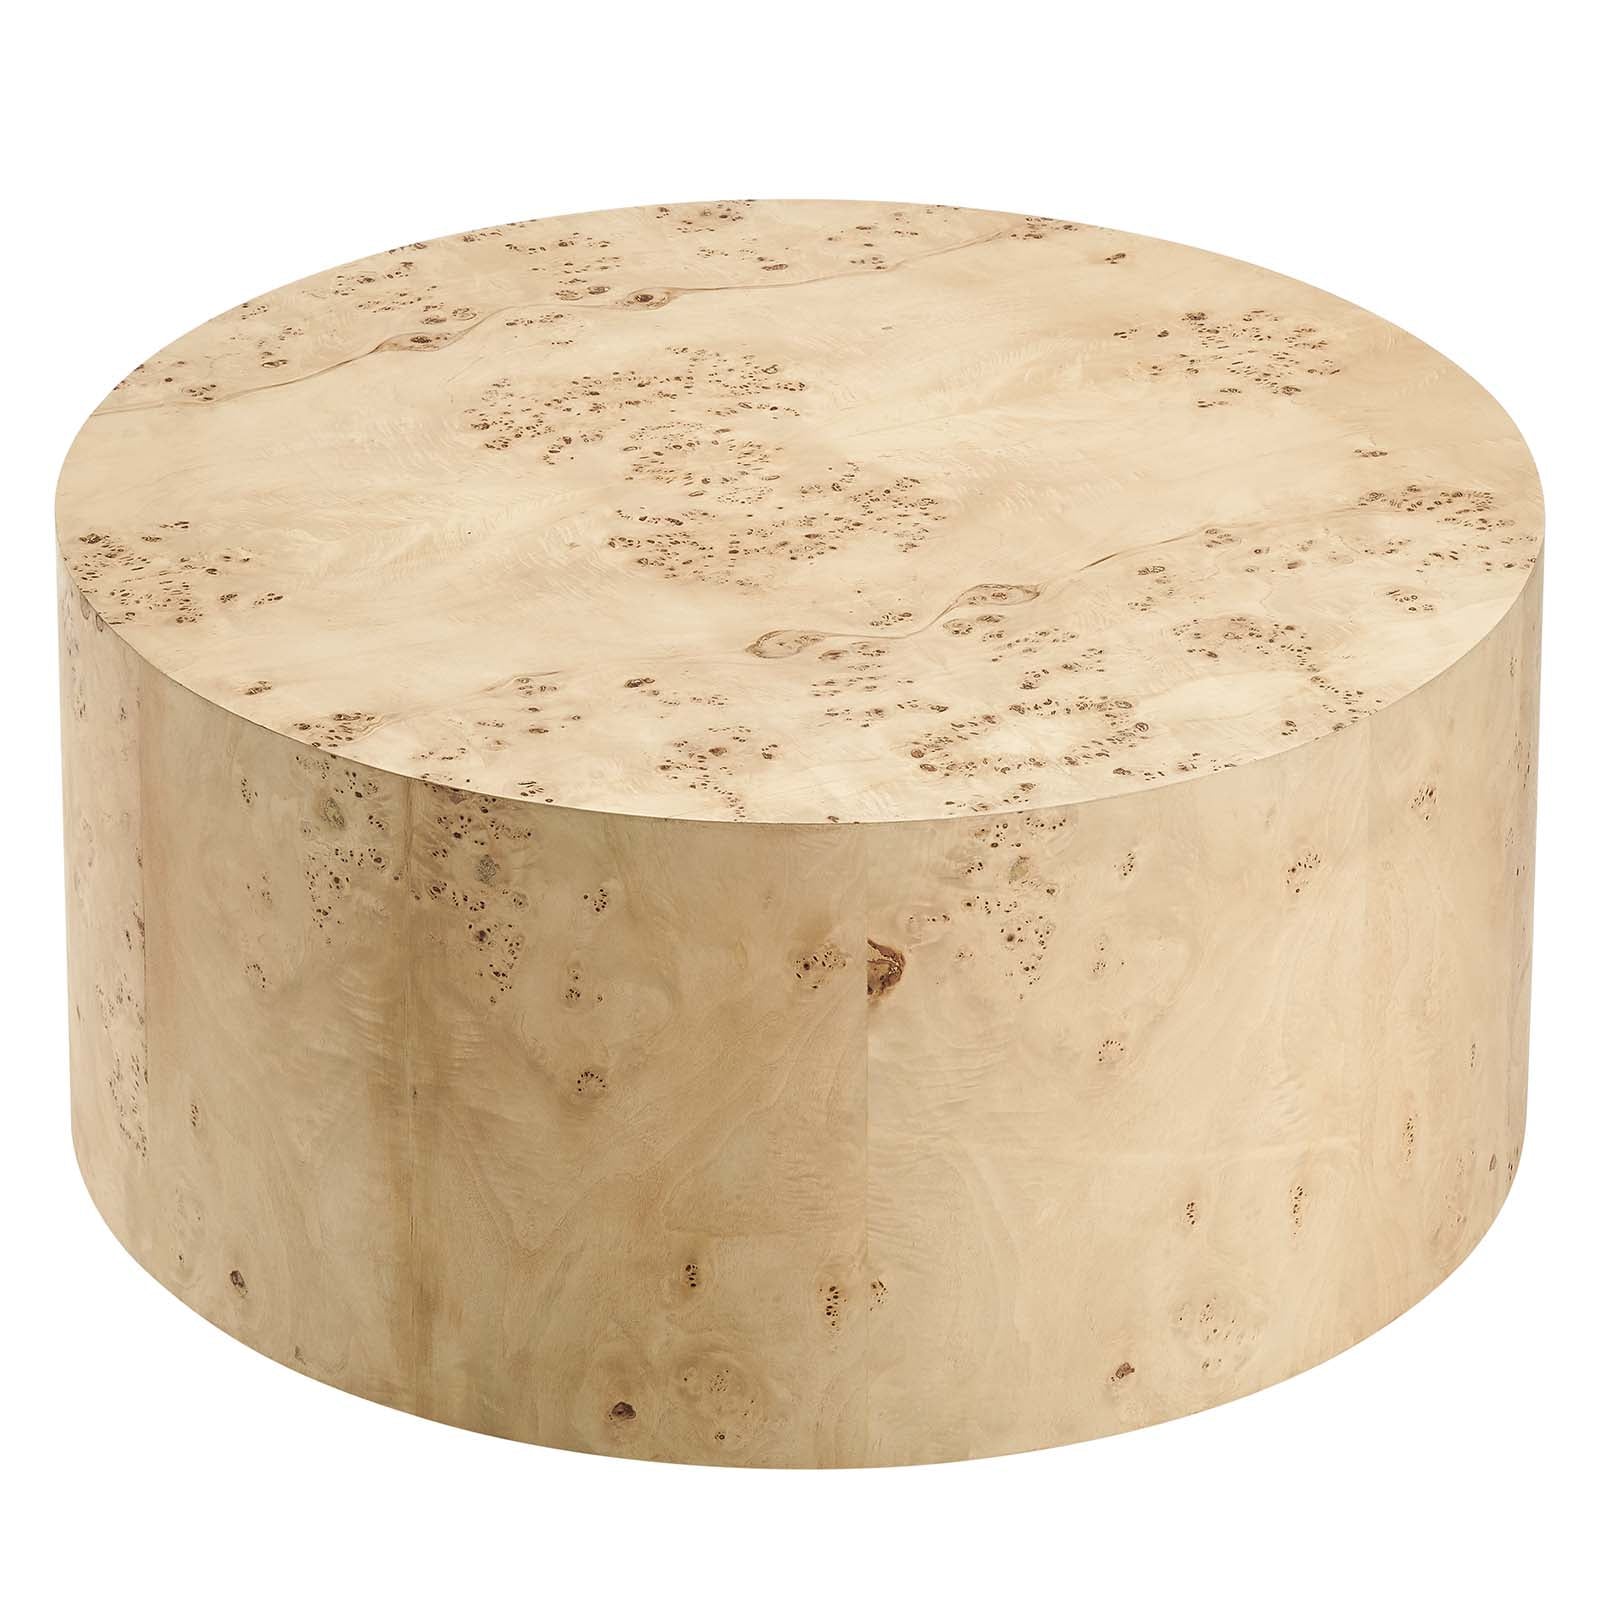 Cosmos 35" Round Burl Wood Coffee Table